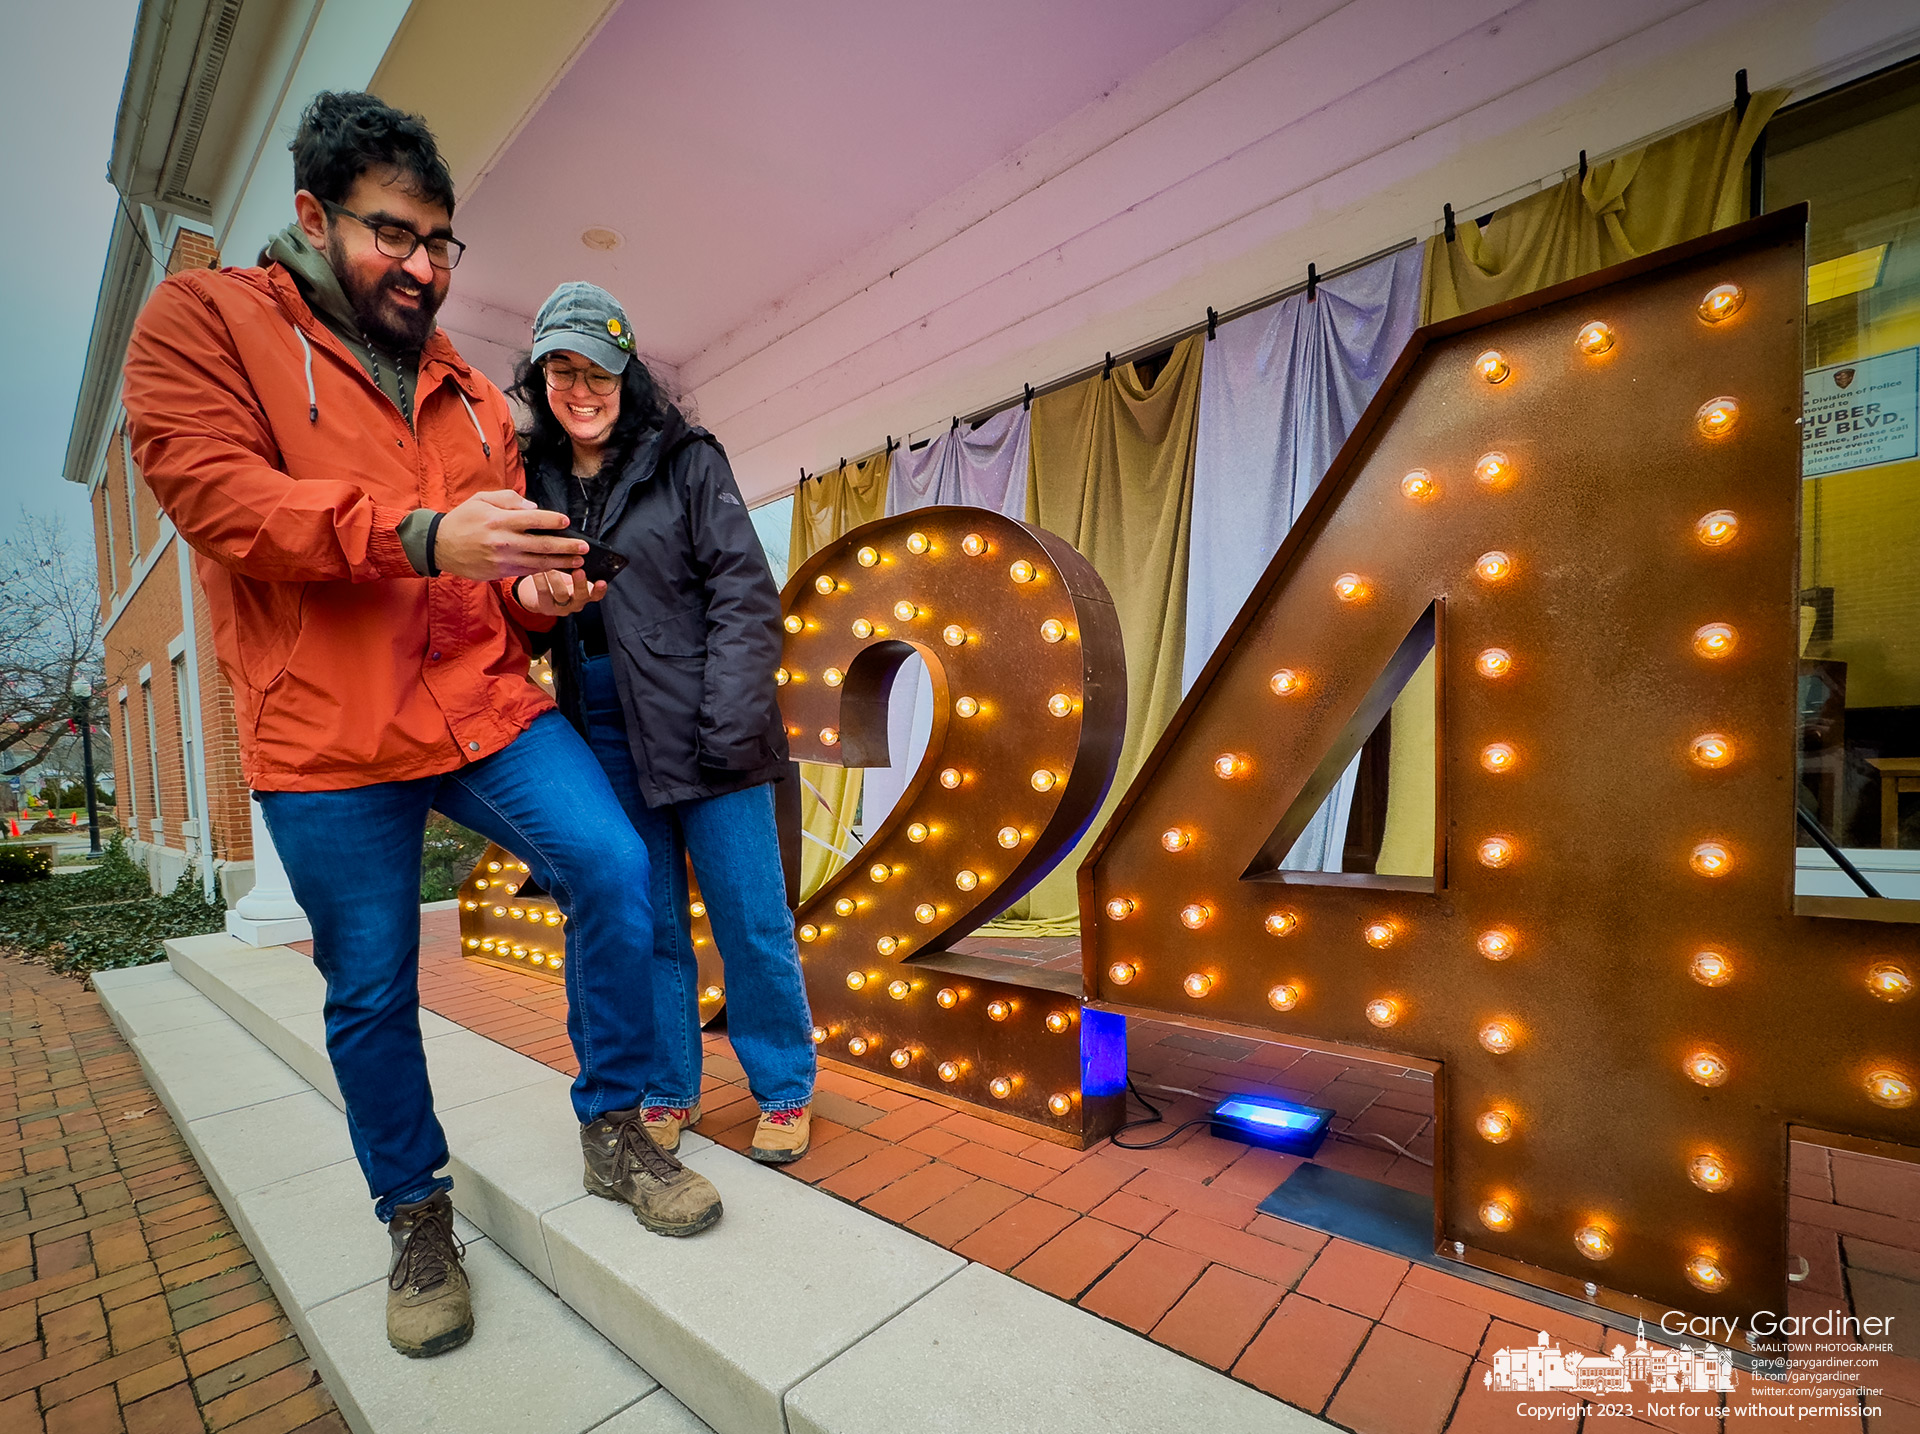 A couple enjoys the photo taken of them posing in front of the lighted 2024 sign at city hall in Uptown Westerville. My Final Photo for December 31, 2023.